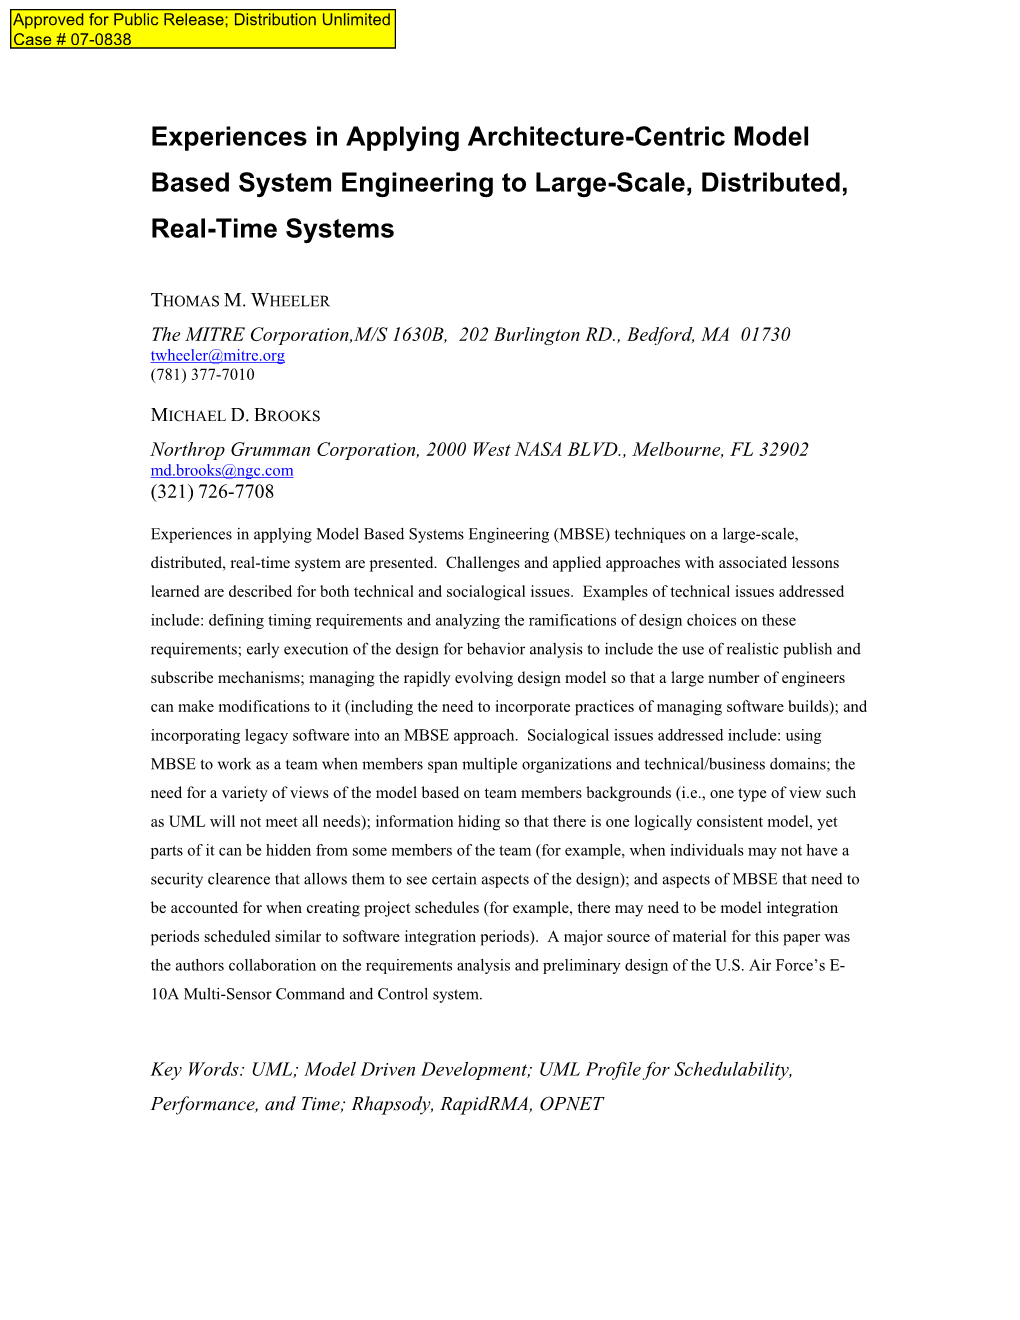 Experiences in Applying Architecture-Centric Model Based System Engineering to Large-Scale, Distributed, Real-Time Systems